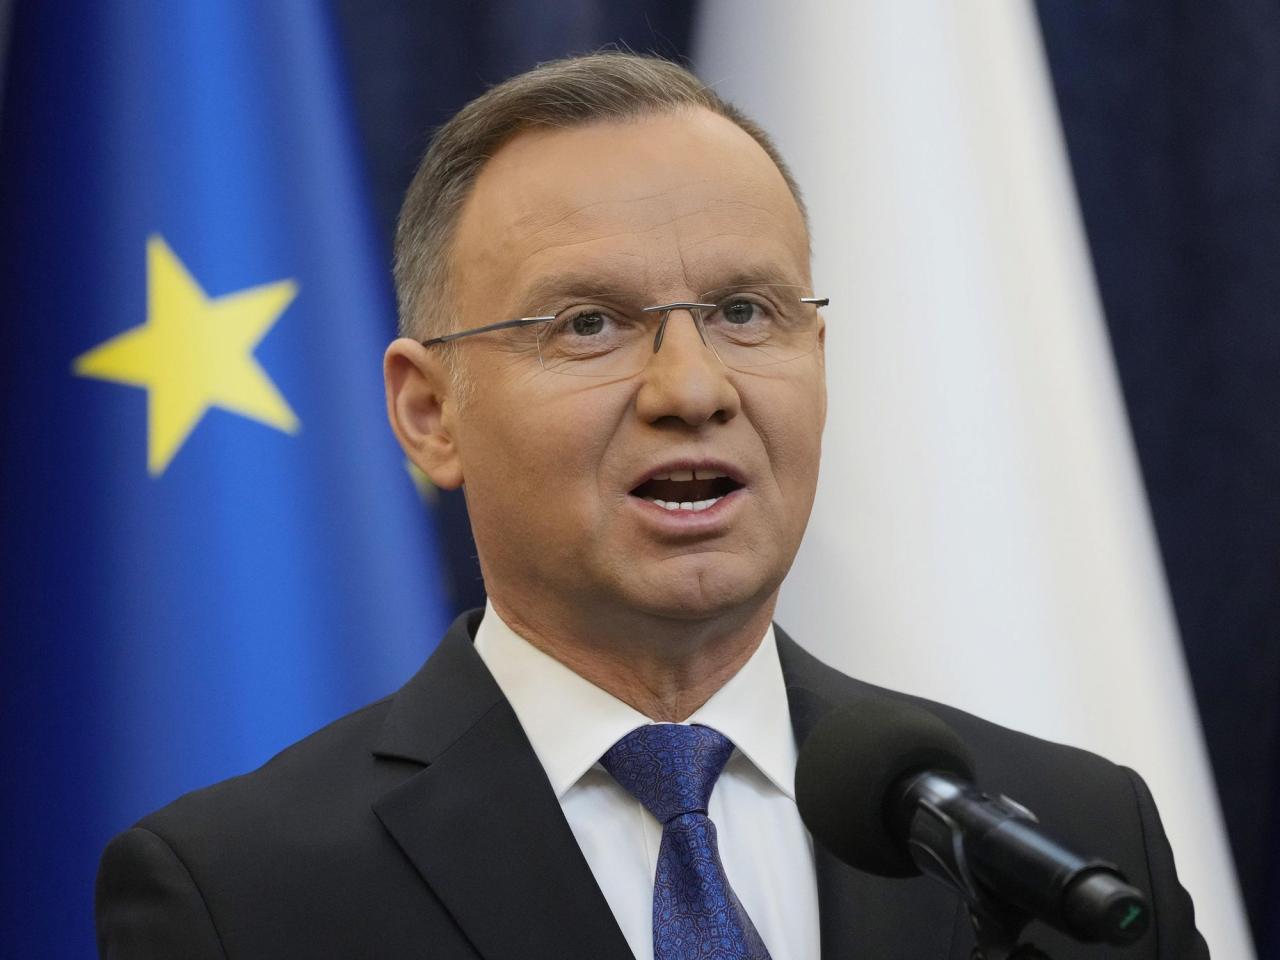 Poland's president vetoes law on free access to morning-after pill for ages 15 and above